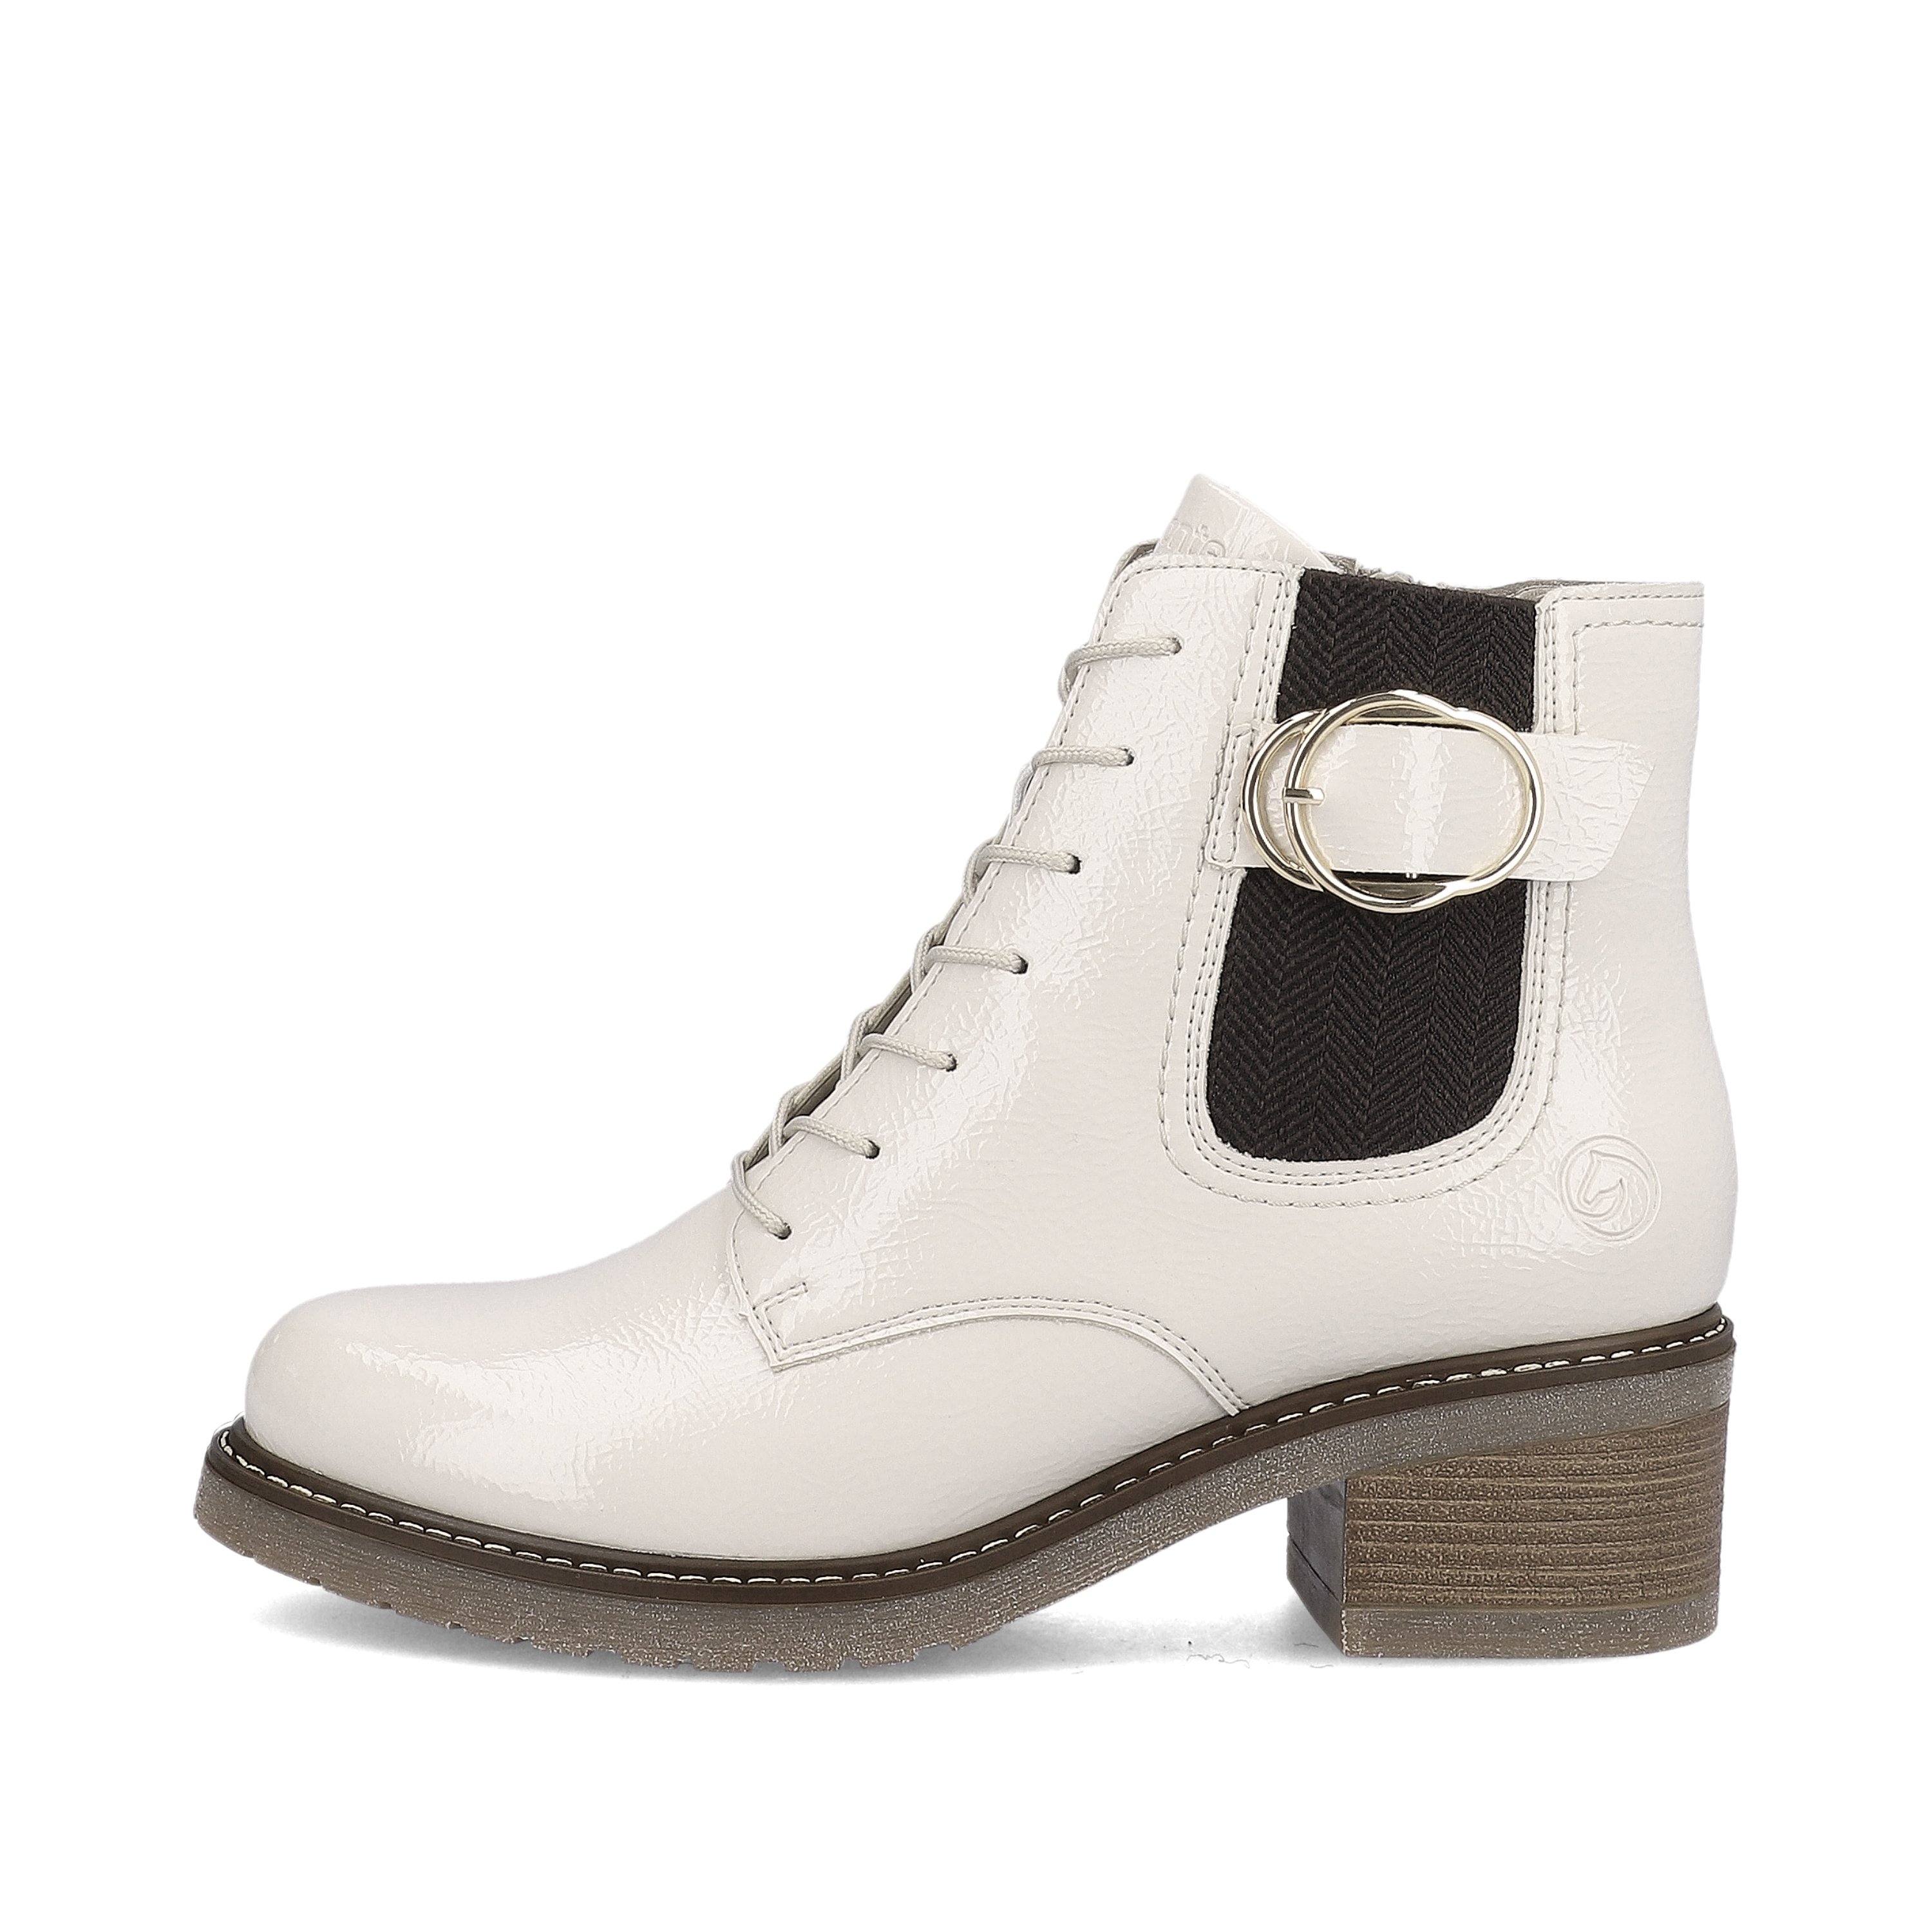 Frost white remonte women´s biker boots D1A72-80 with profile sole with block heel. The outside of the shoe